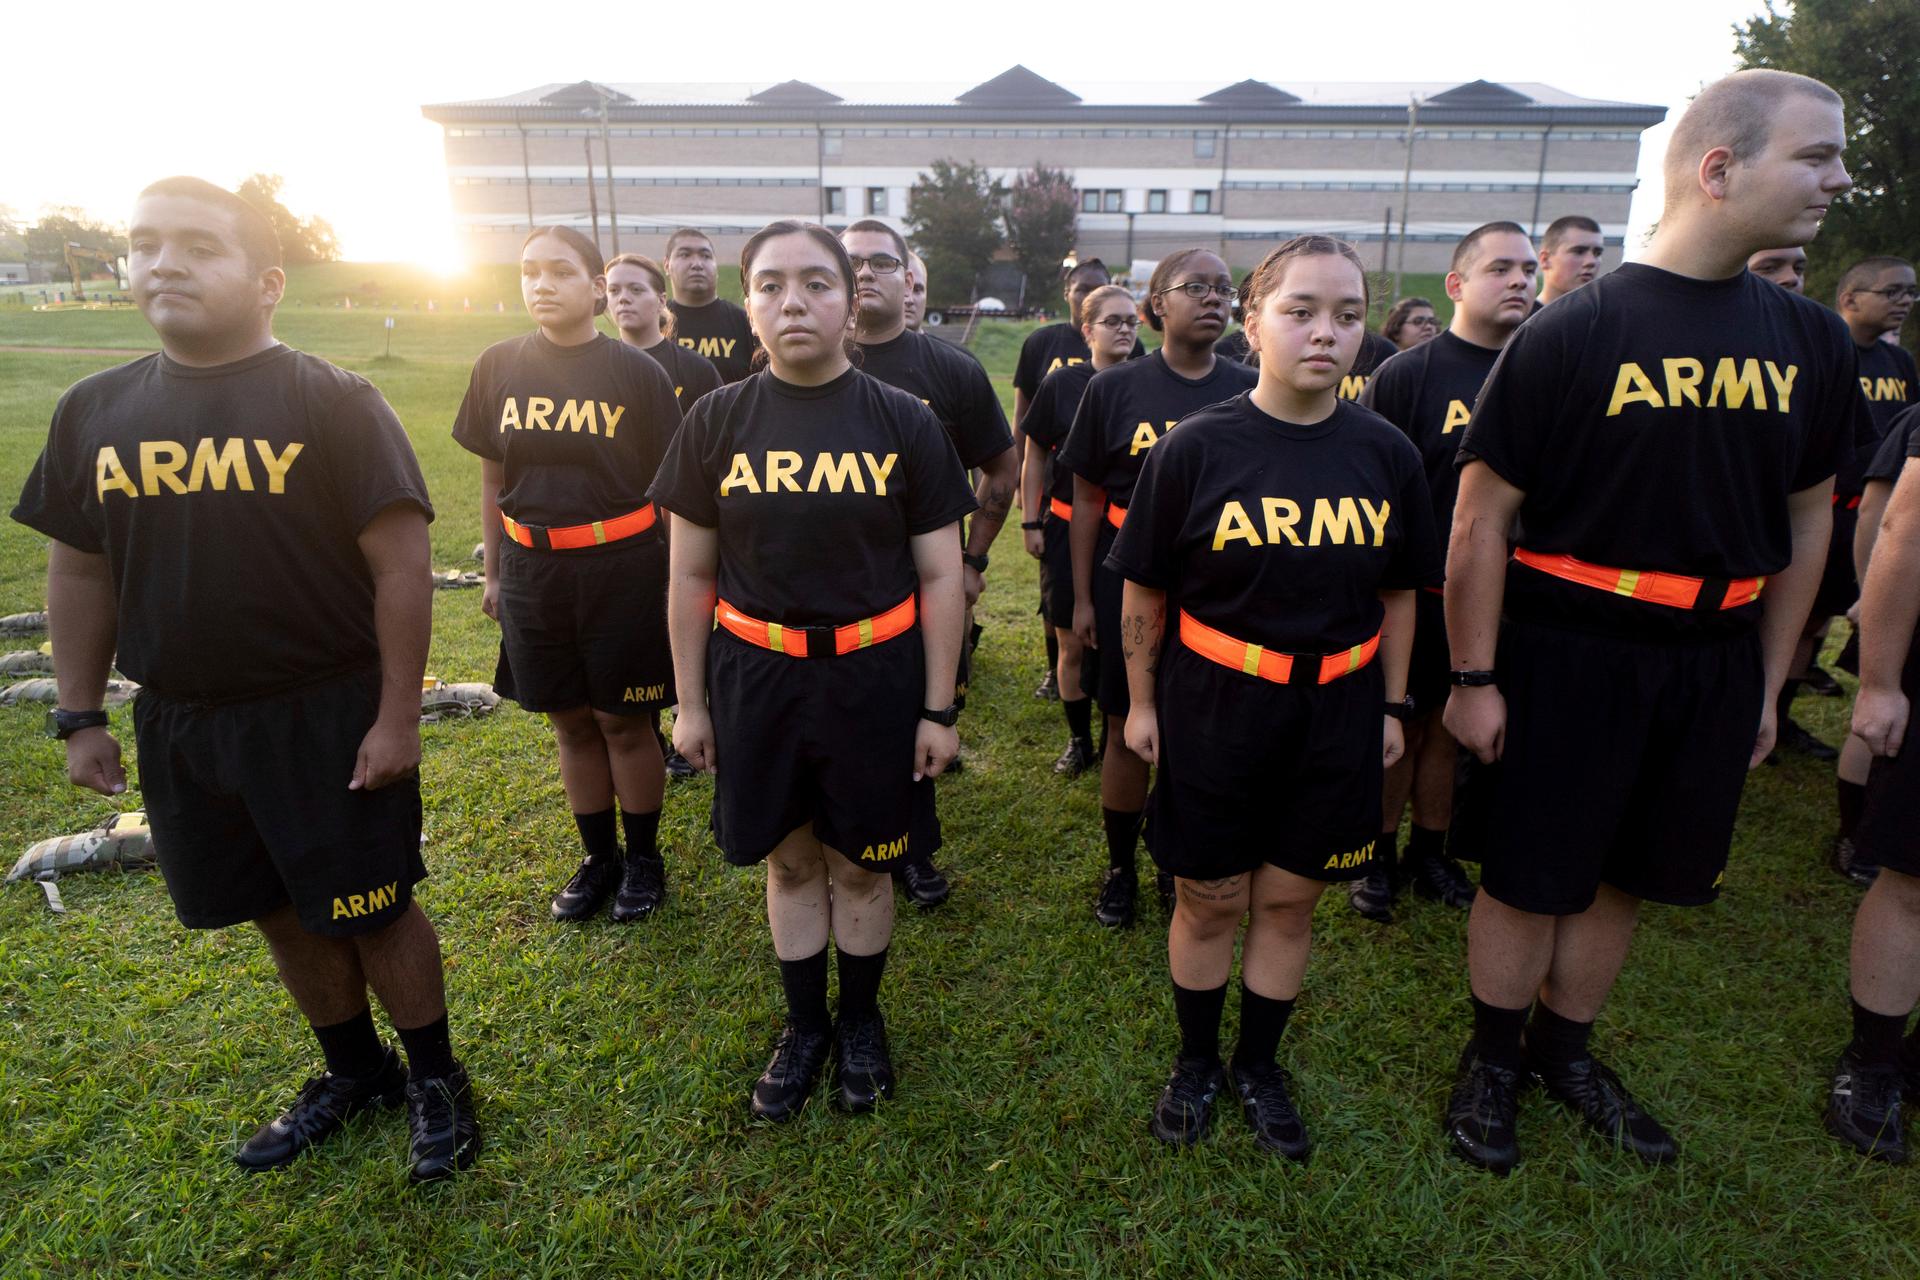 US Army recruits in assumed position, wearing black t-shirts that have "ARMY" written across in bold yellow letters